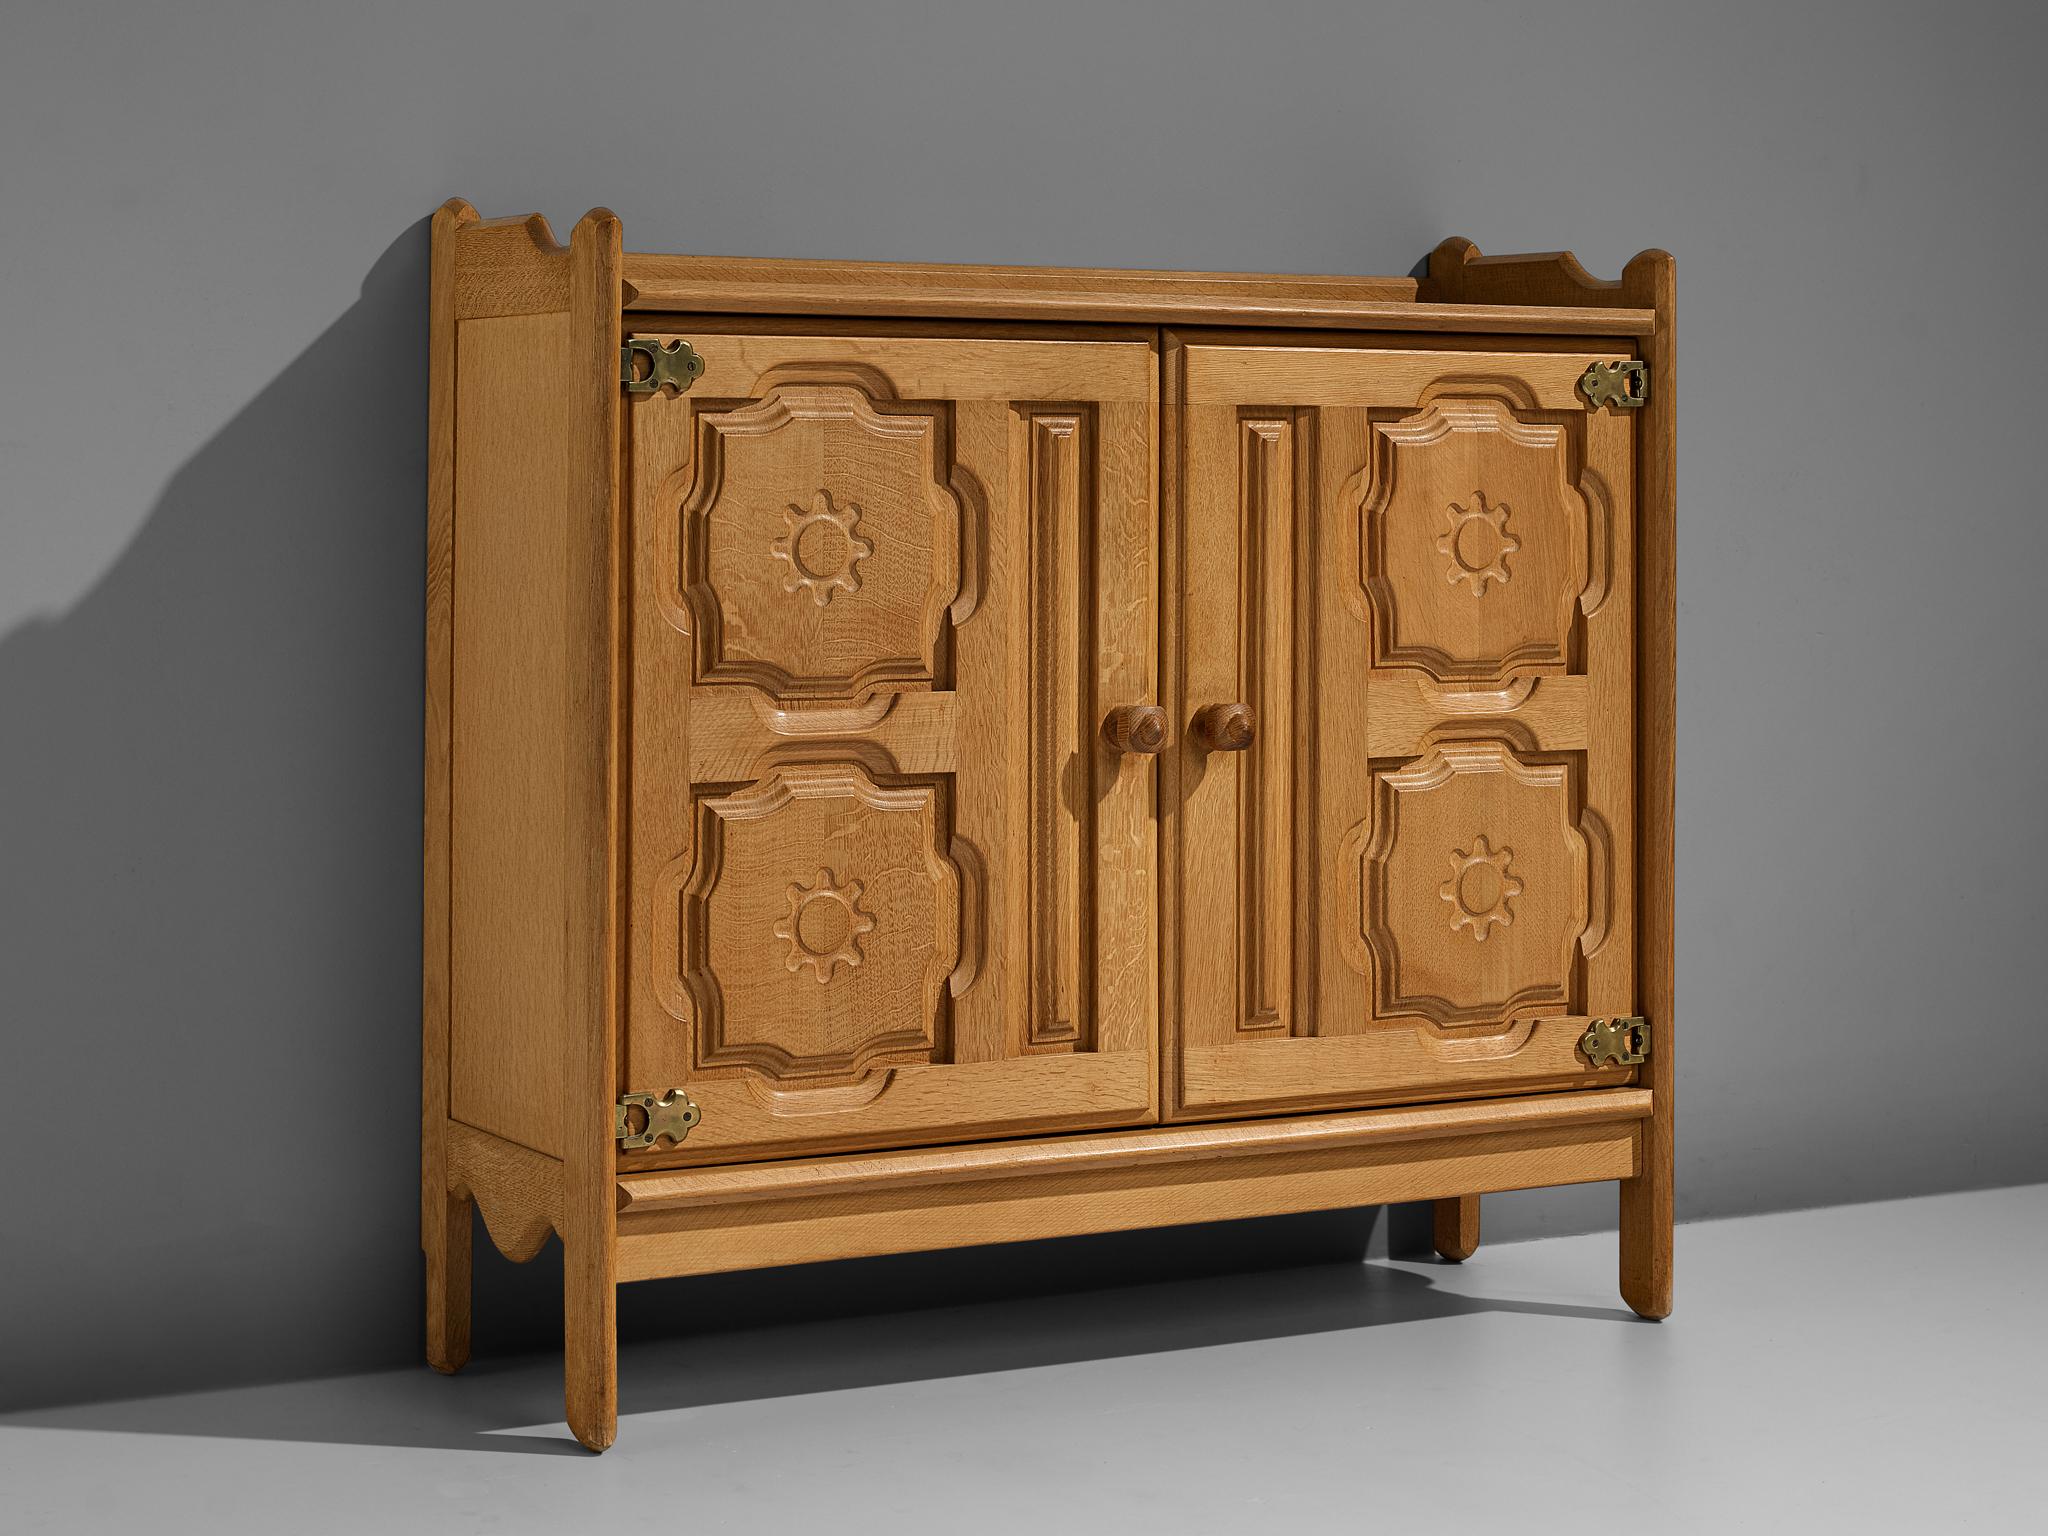 Guillerme et Chambron, high board, oak, brass, France, 1950s.

This highboard by French designer duo Guillerme et Chambron features beautiful ornamented doors. Both oak doors are carved with flowerlike ornaments. Round wooden handles access the